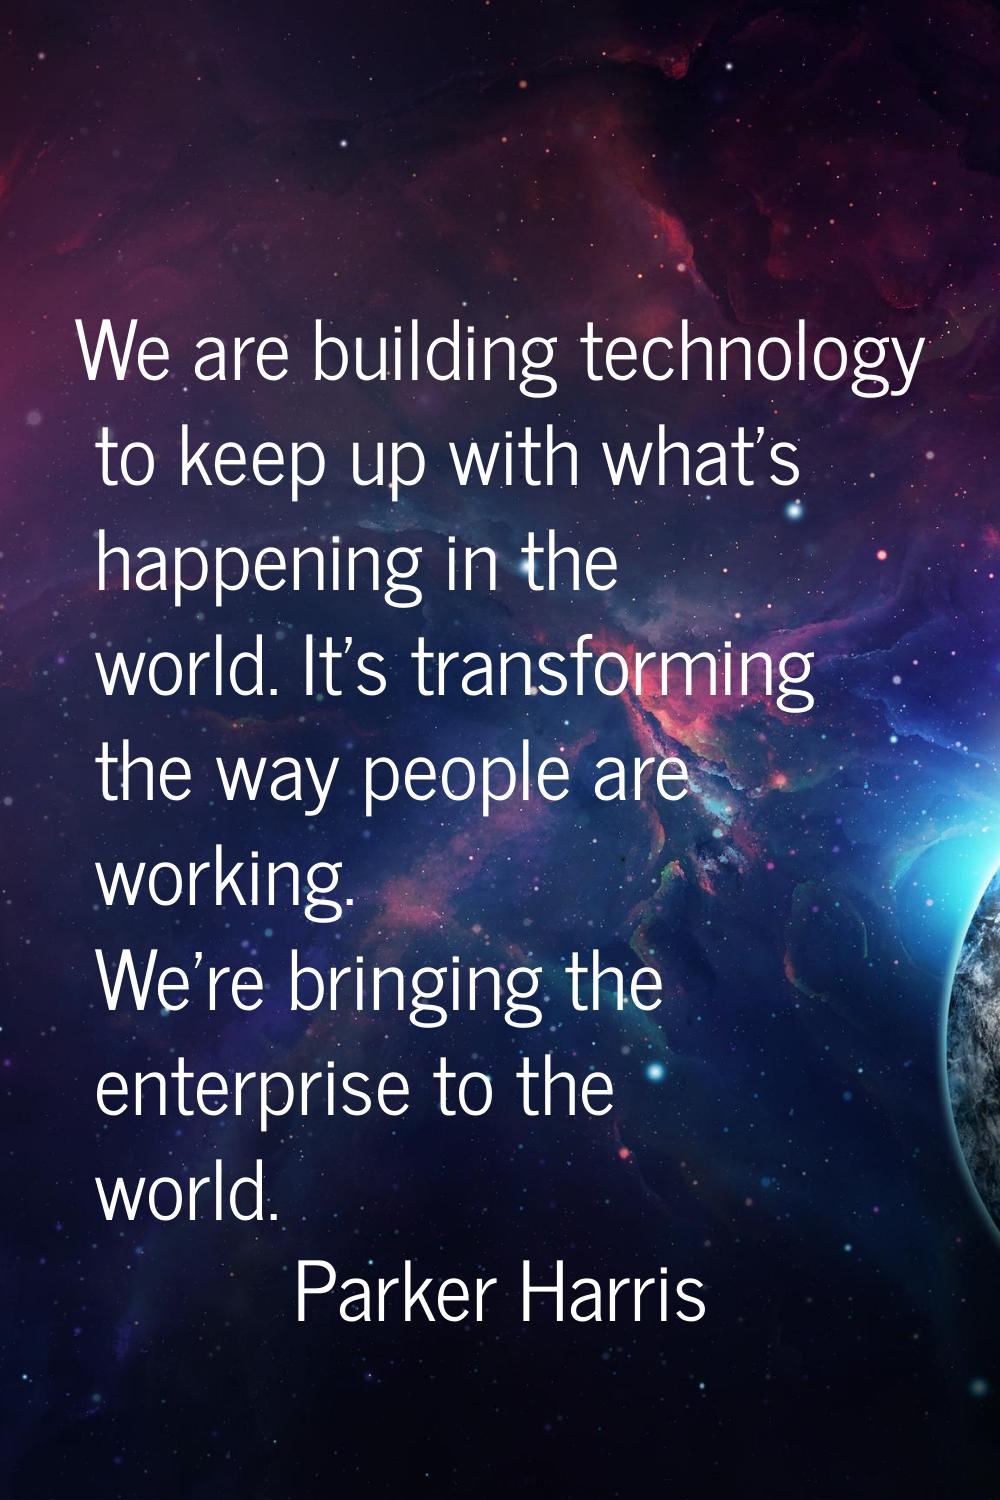 We are building technology to keep up with what's happening in the world. It's transforming the way